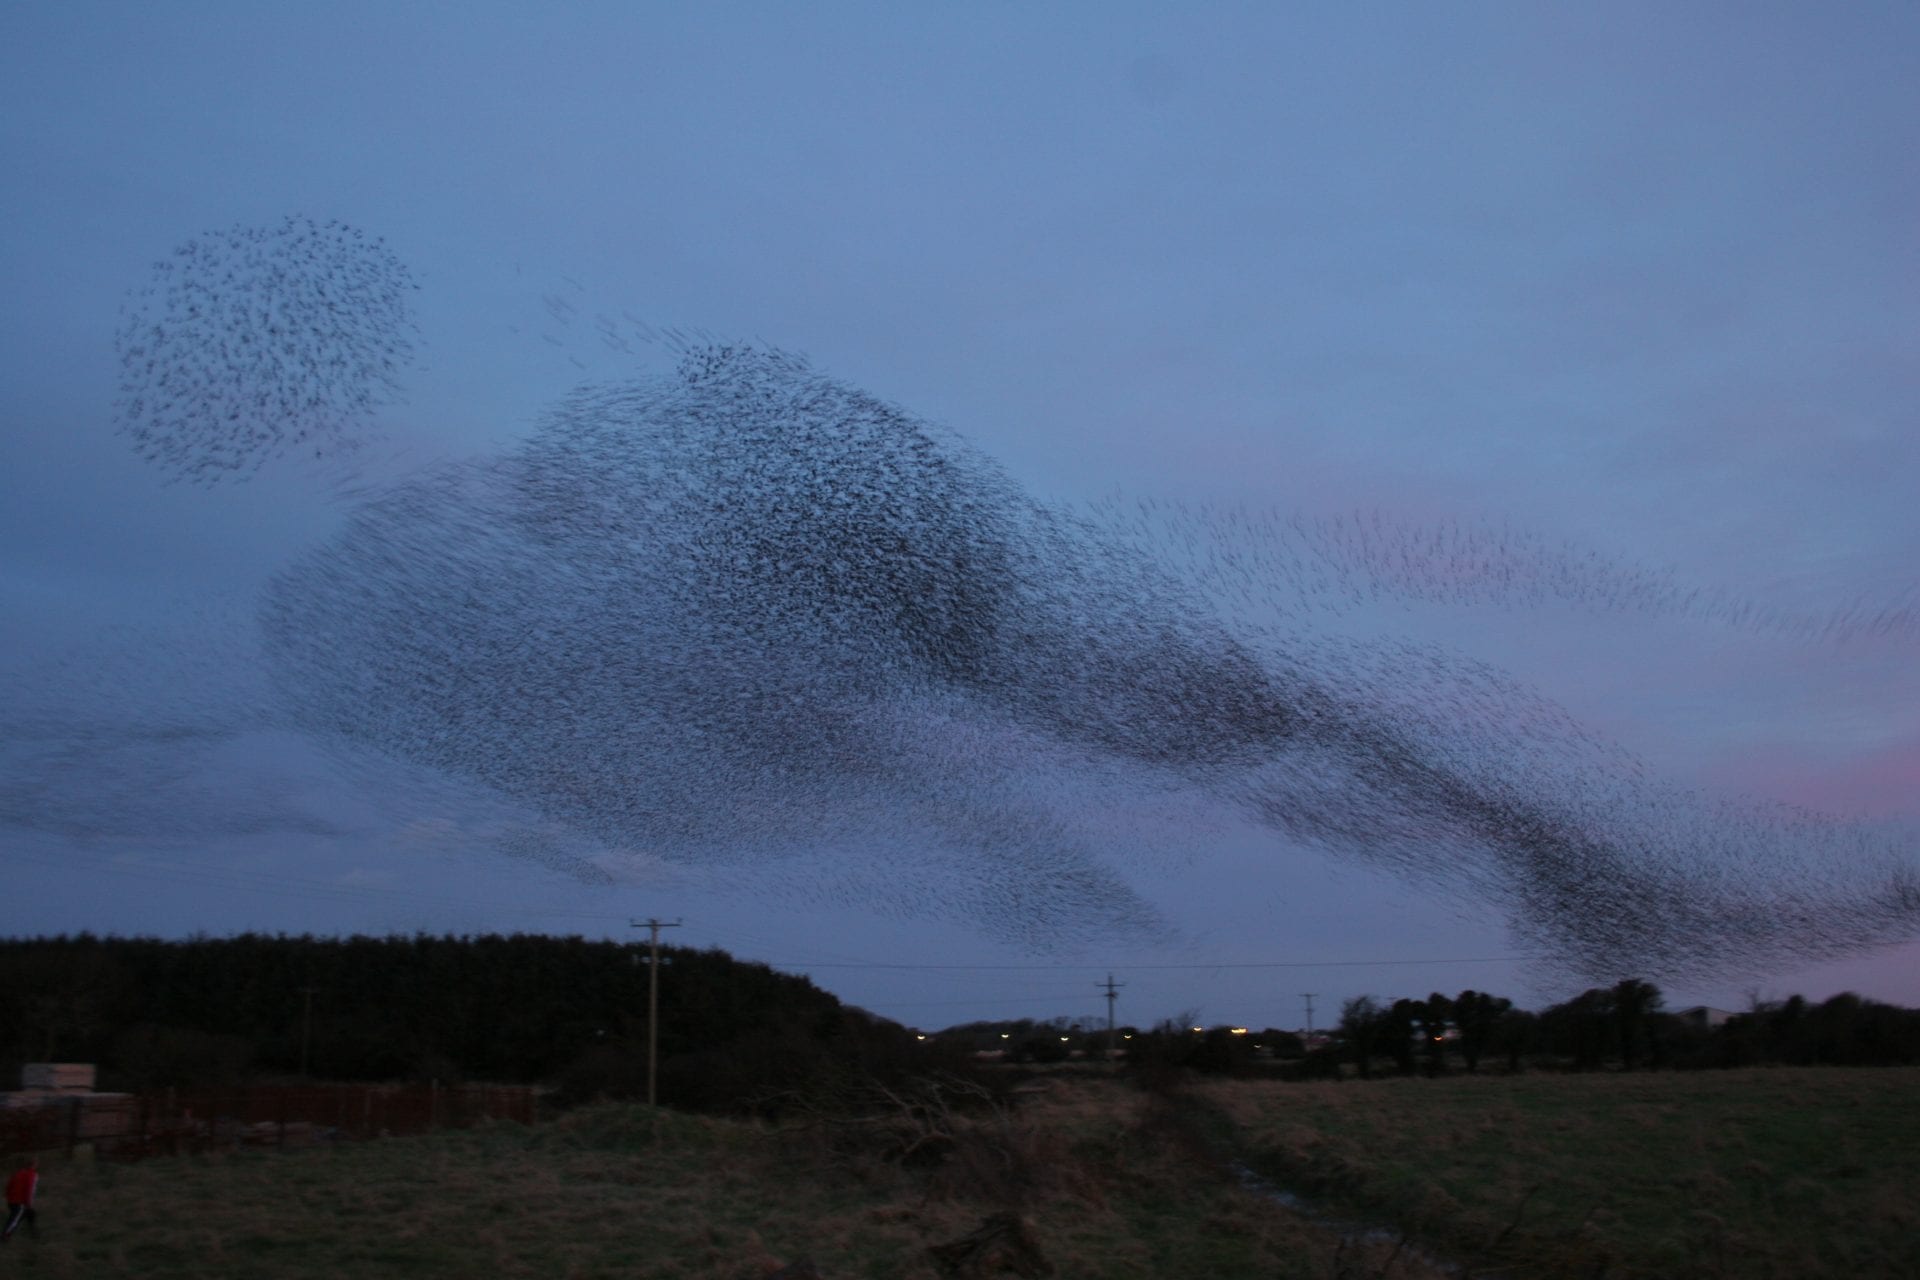 Starling murmurations cause great excitement in Co. Meath